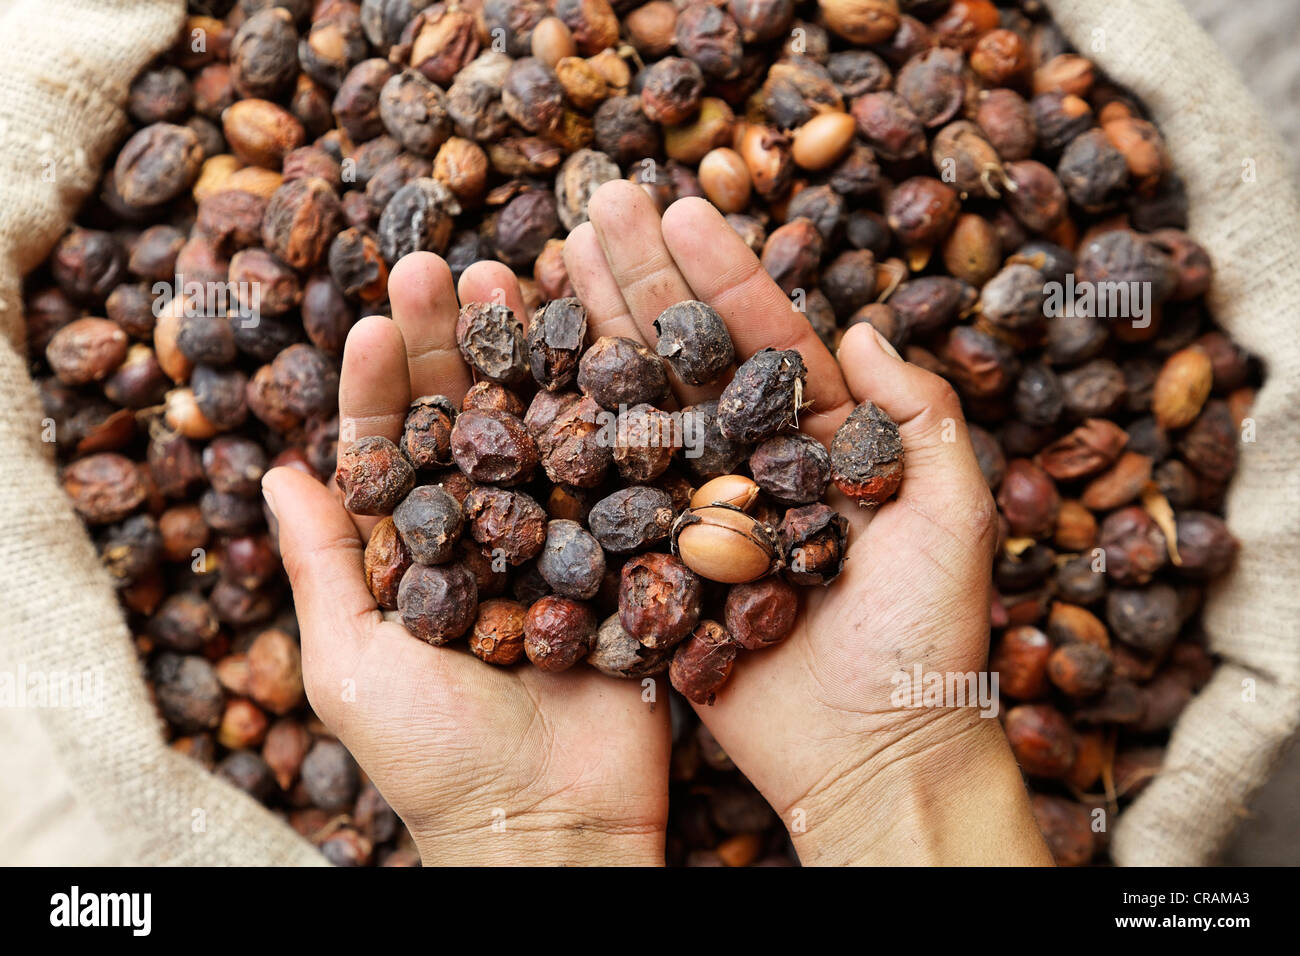 An argan oil producer controlling with his hands the delivered Argan (Argania spinosa) nuts, near Essaouira, Morocco, Africa Stock Photo